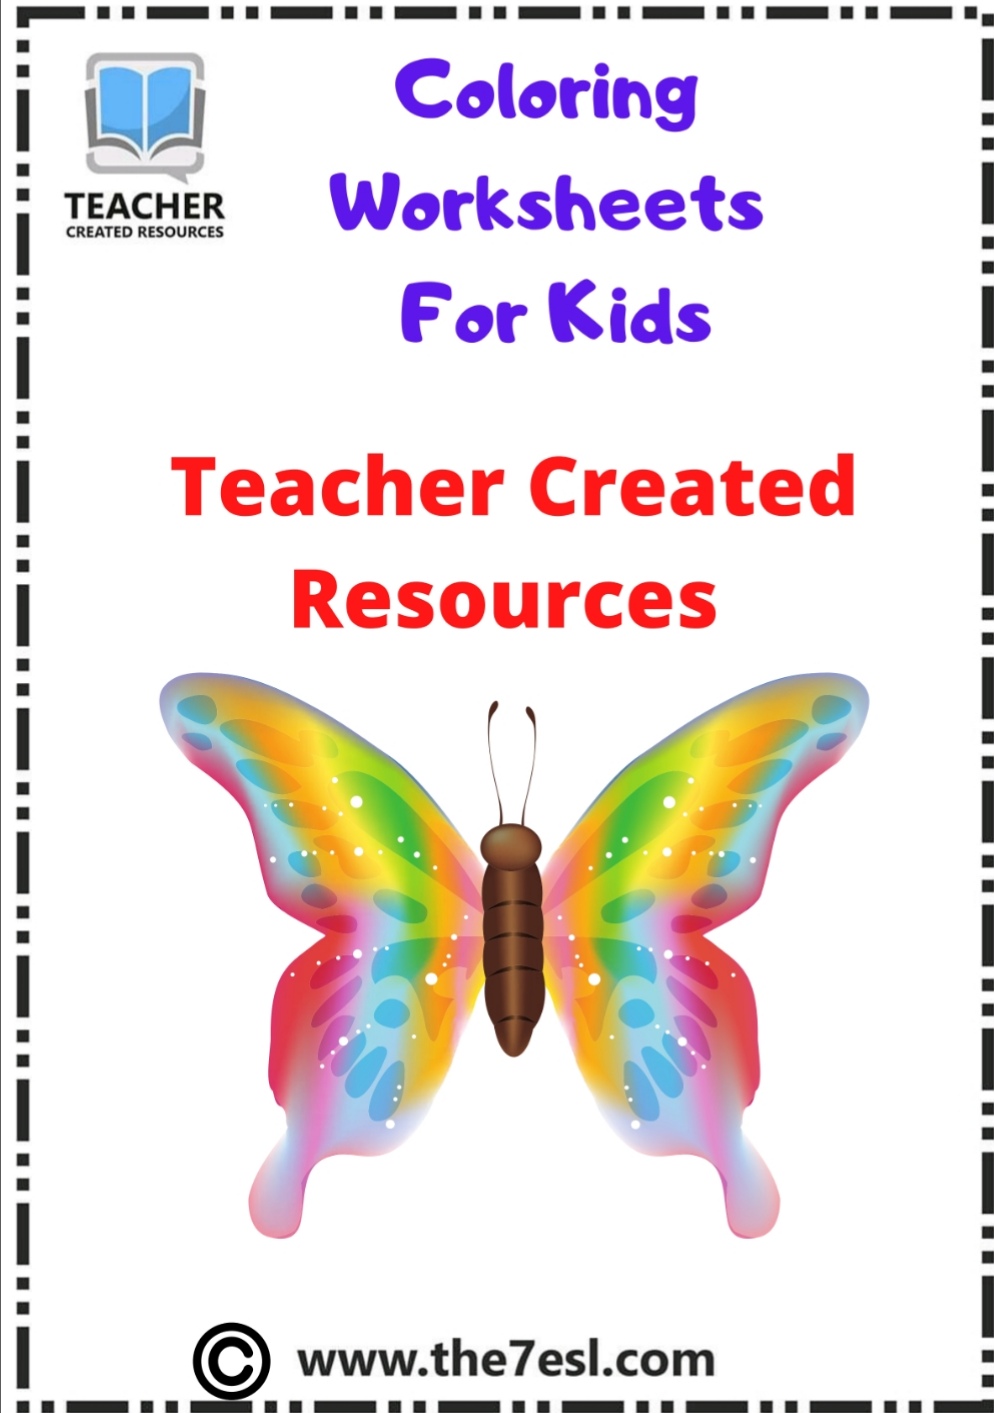 coloring-worksheets-for-kids-english-created-resources